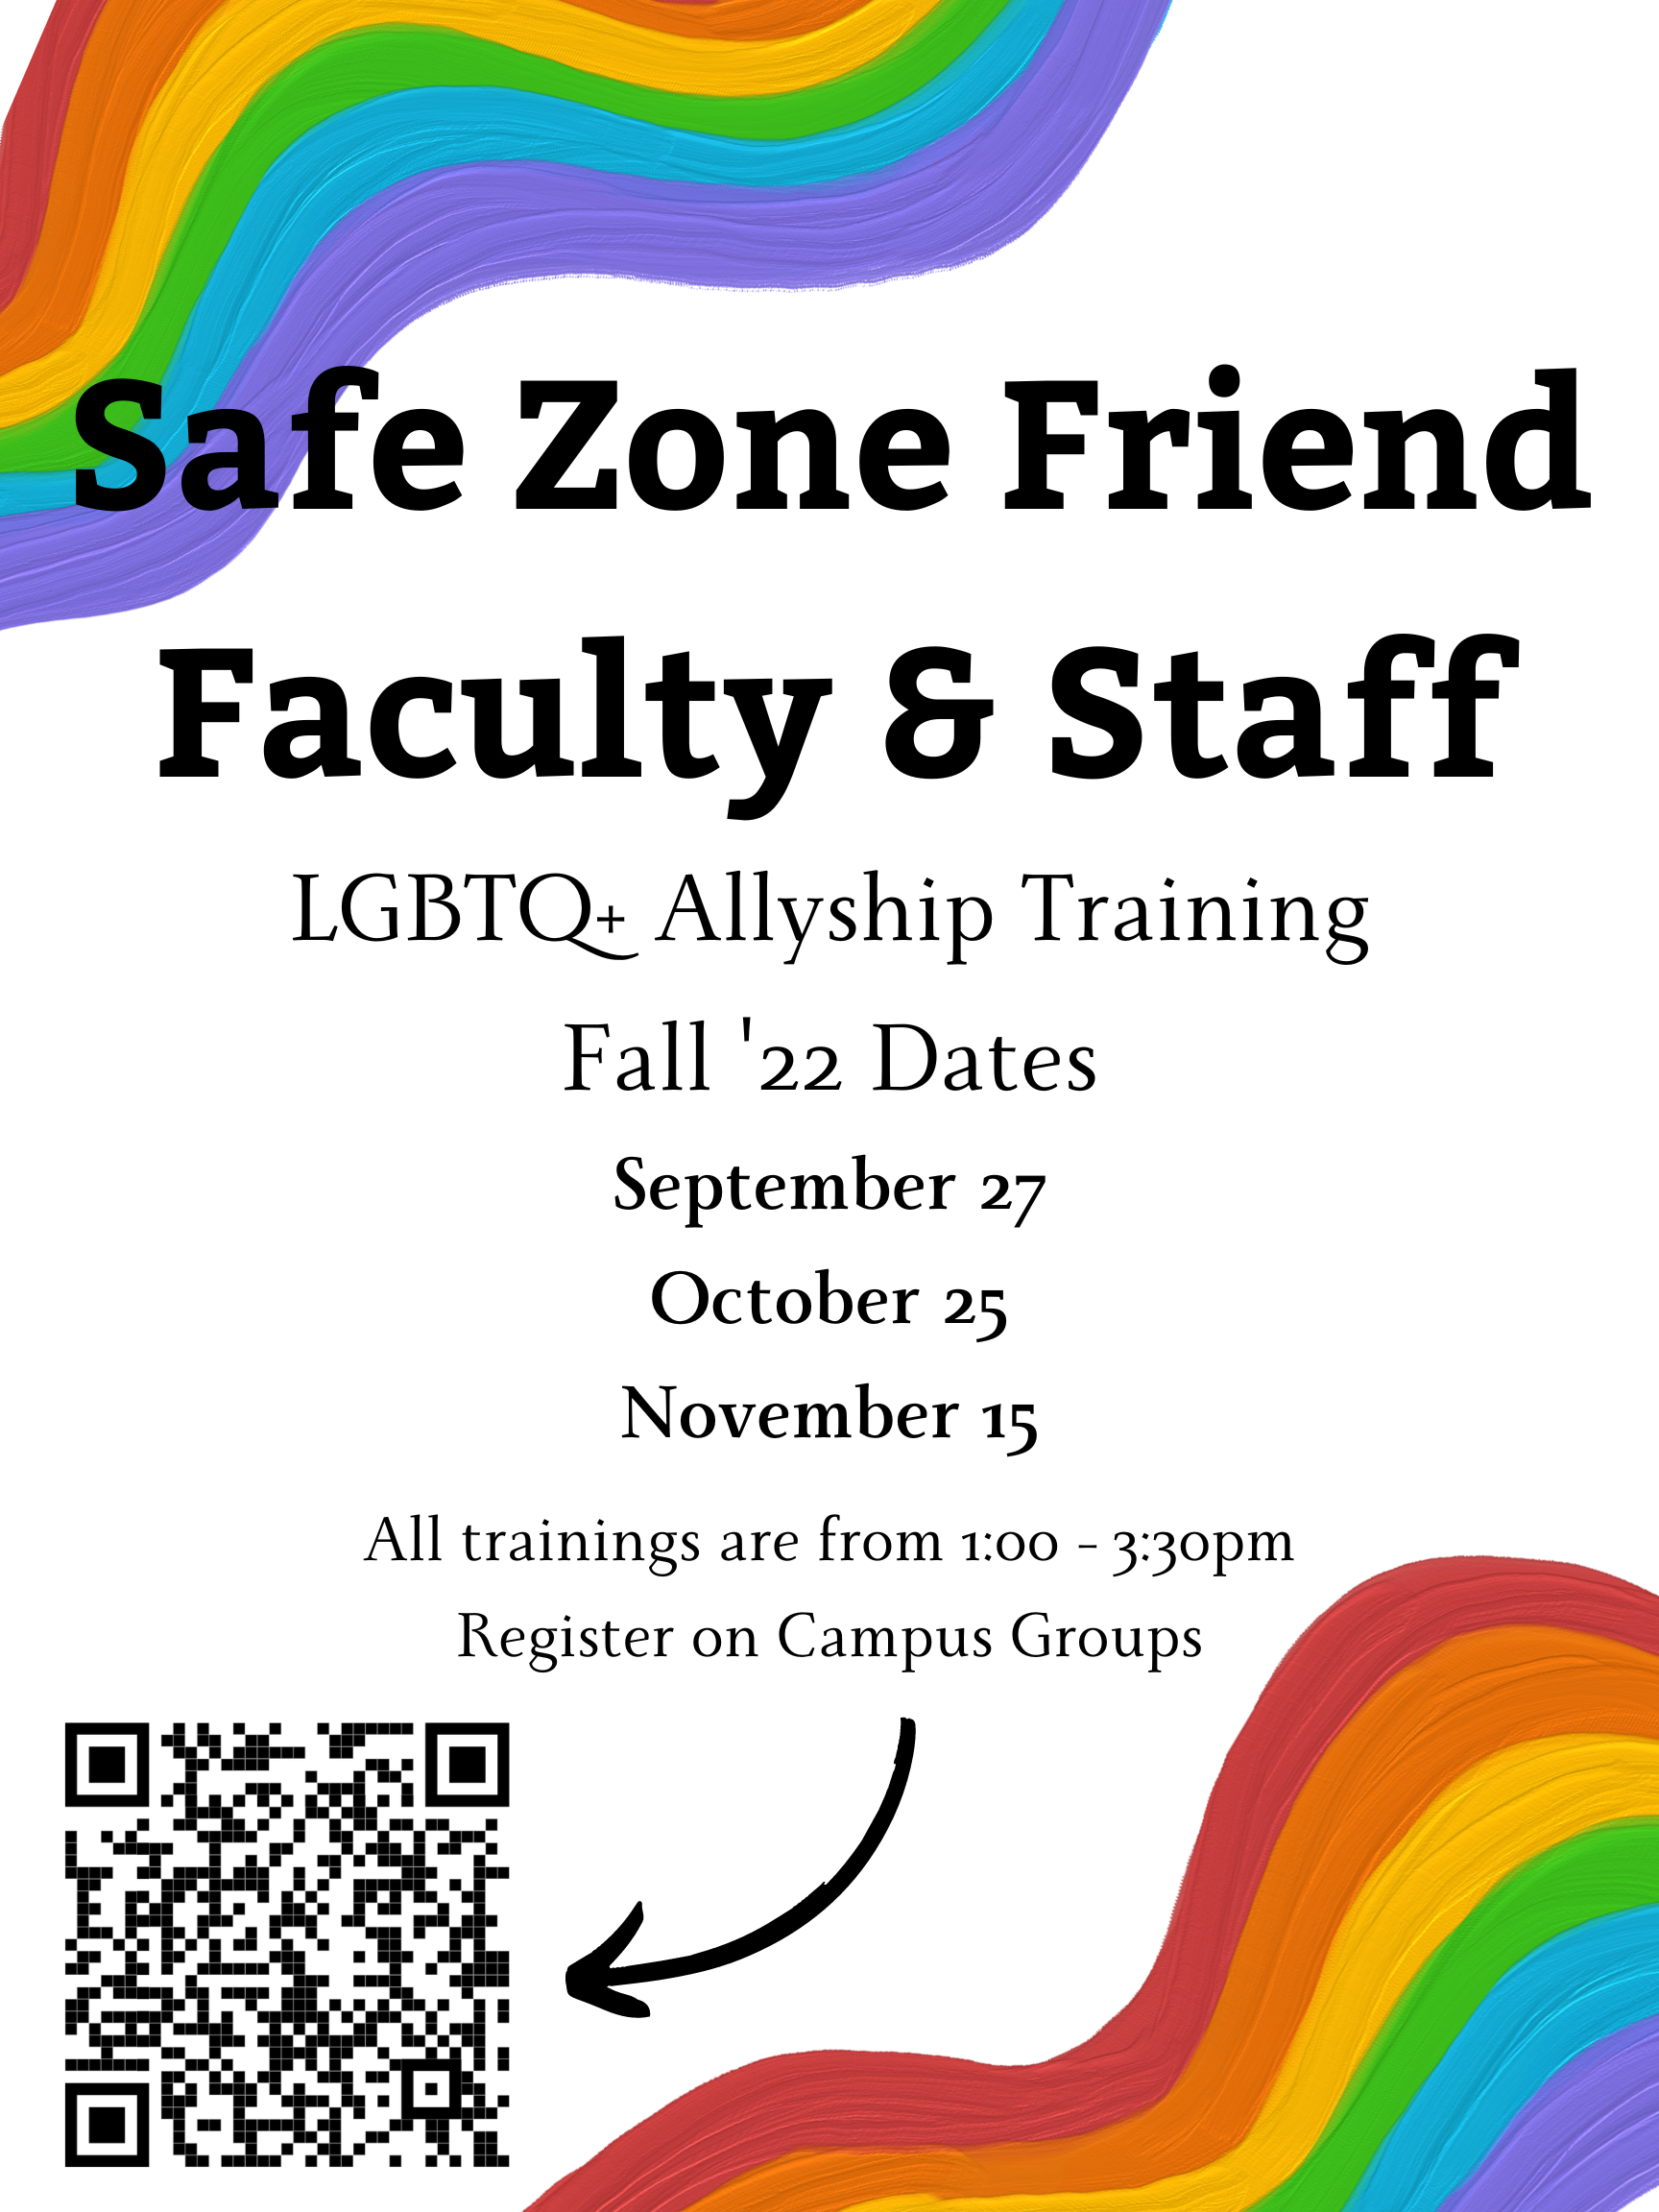 Safe Zone Friend Faculty and Staff Training Dates: September 27, October 25, and November 15. All trainings are from 1:00 to 3:30. Register on Campus Groups